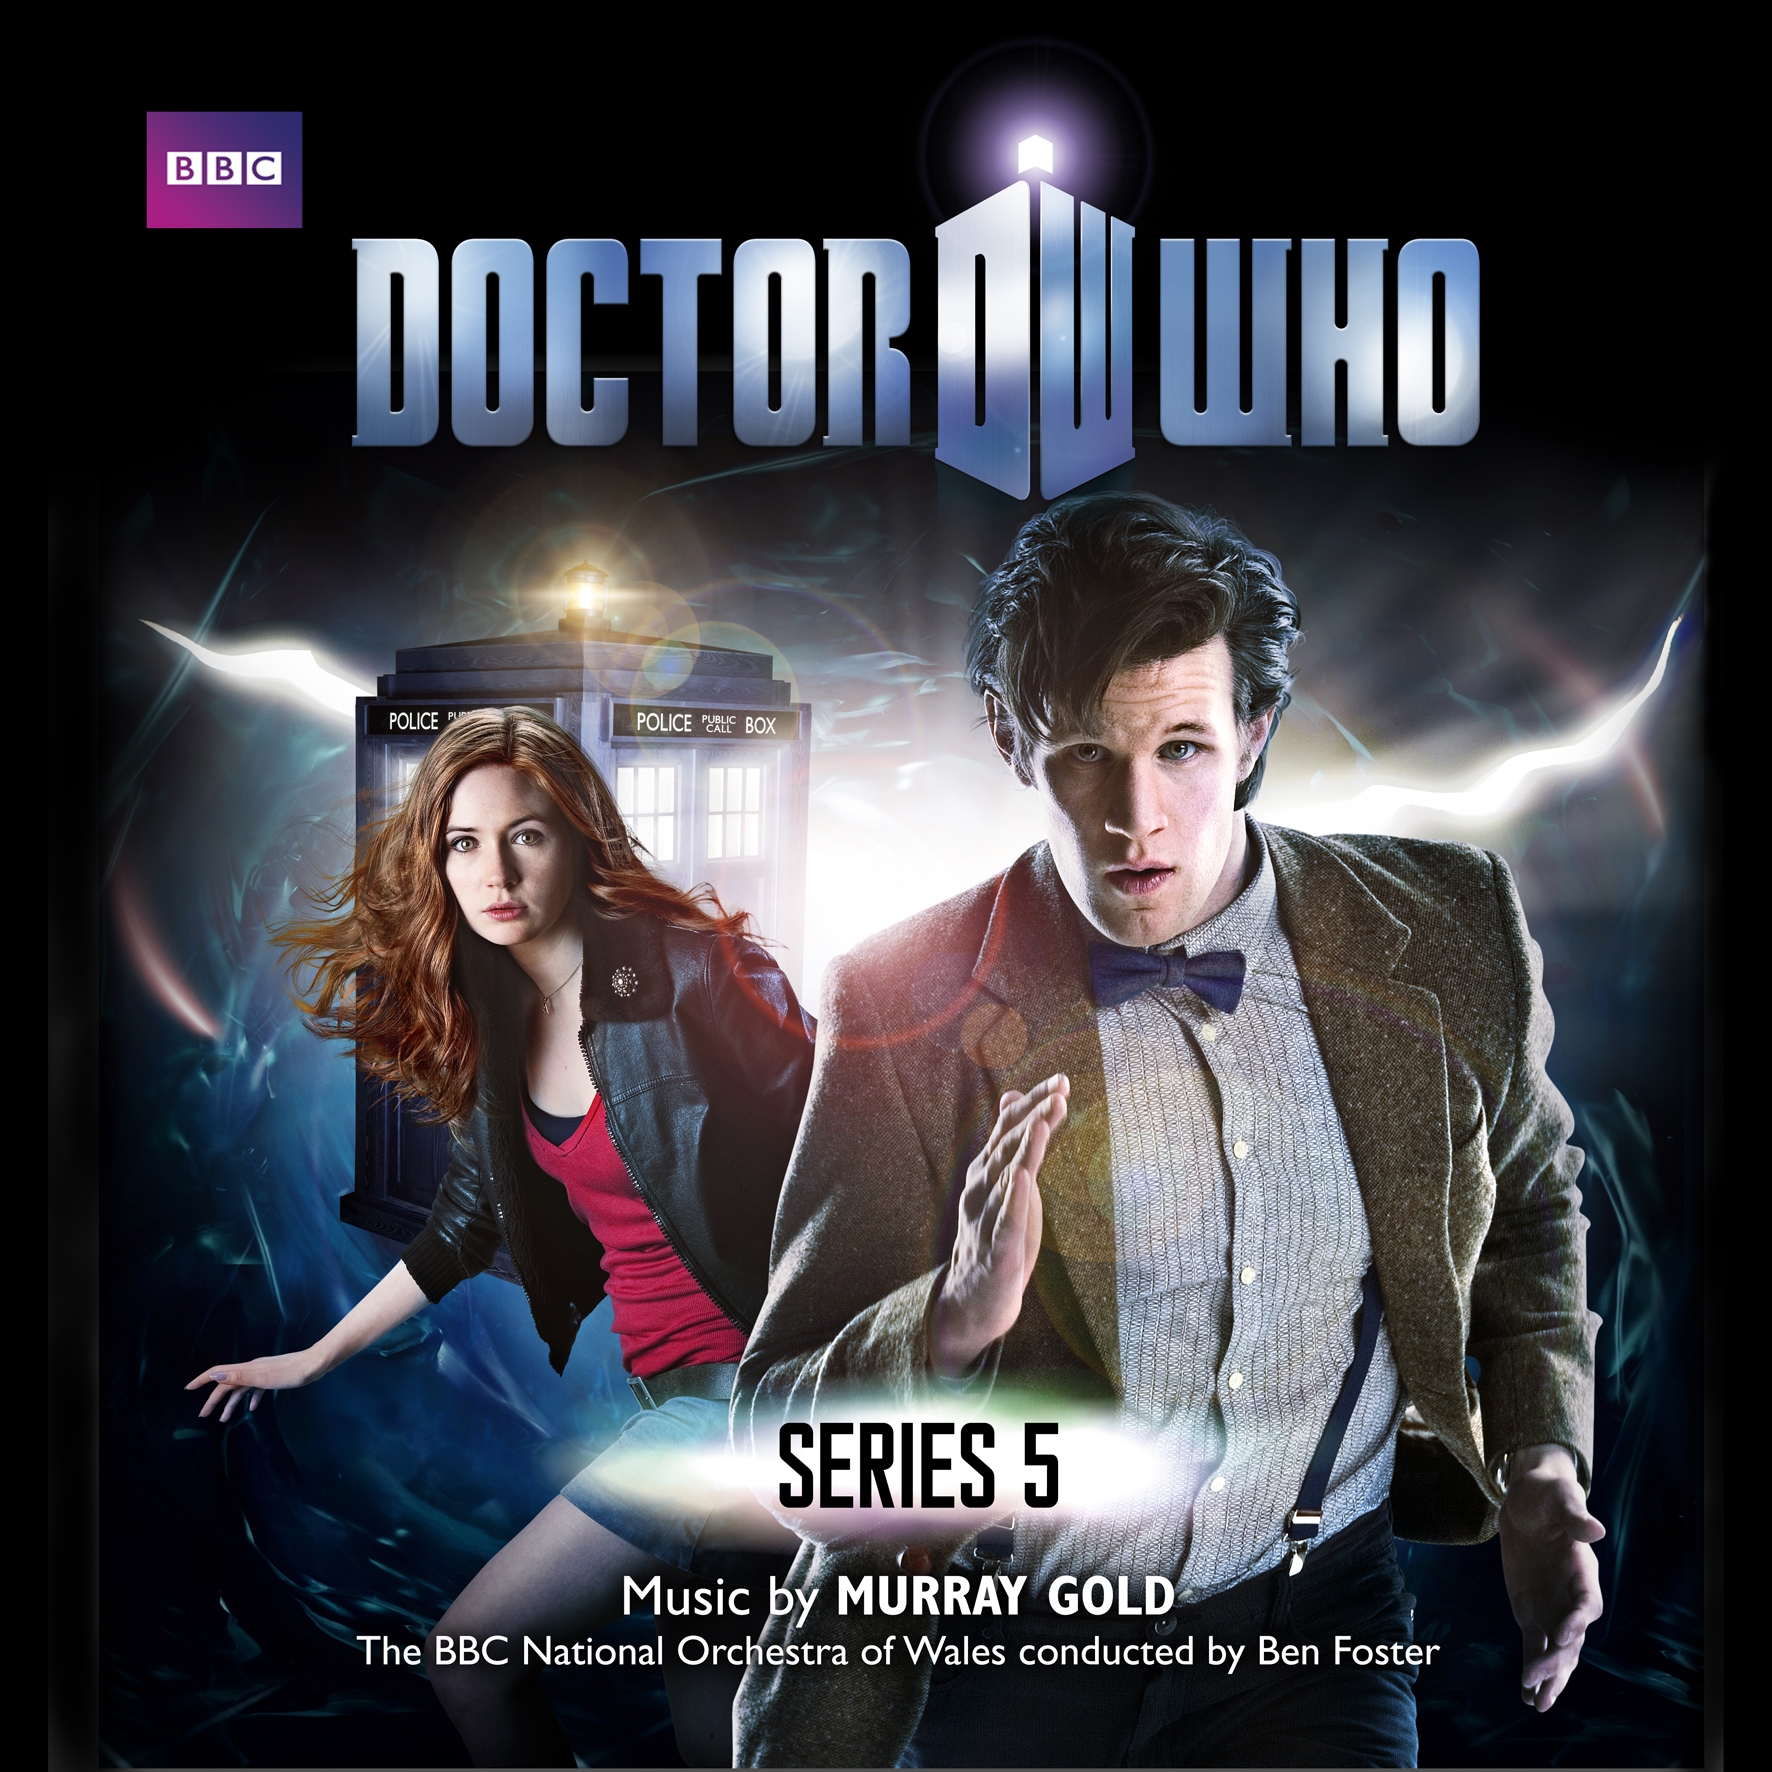 Doctor Who (series 5) - Wikipedia